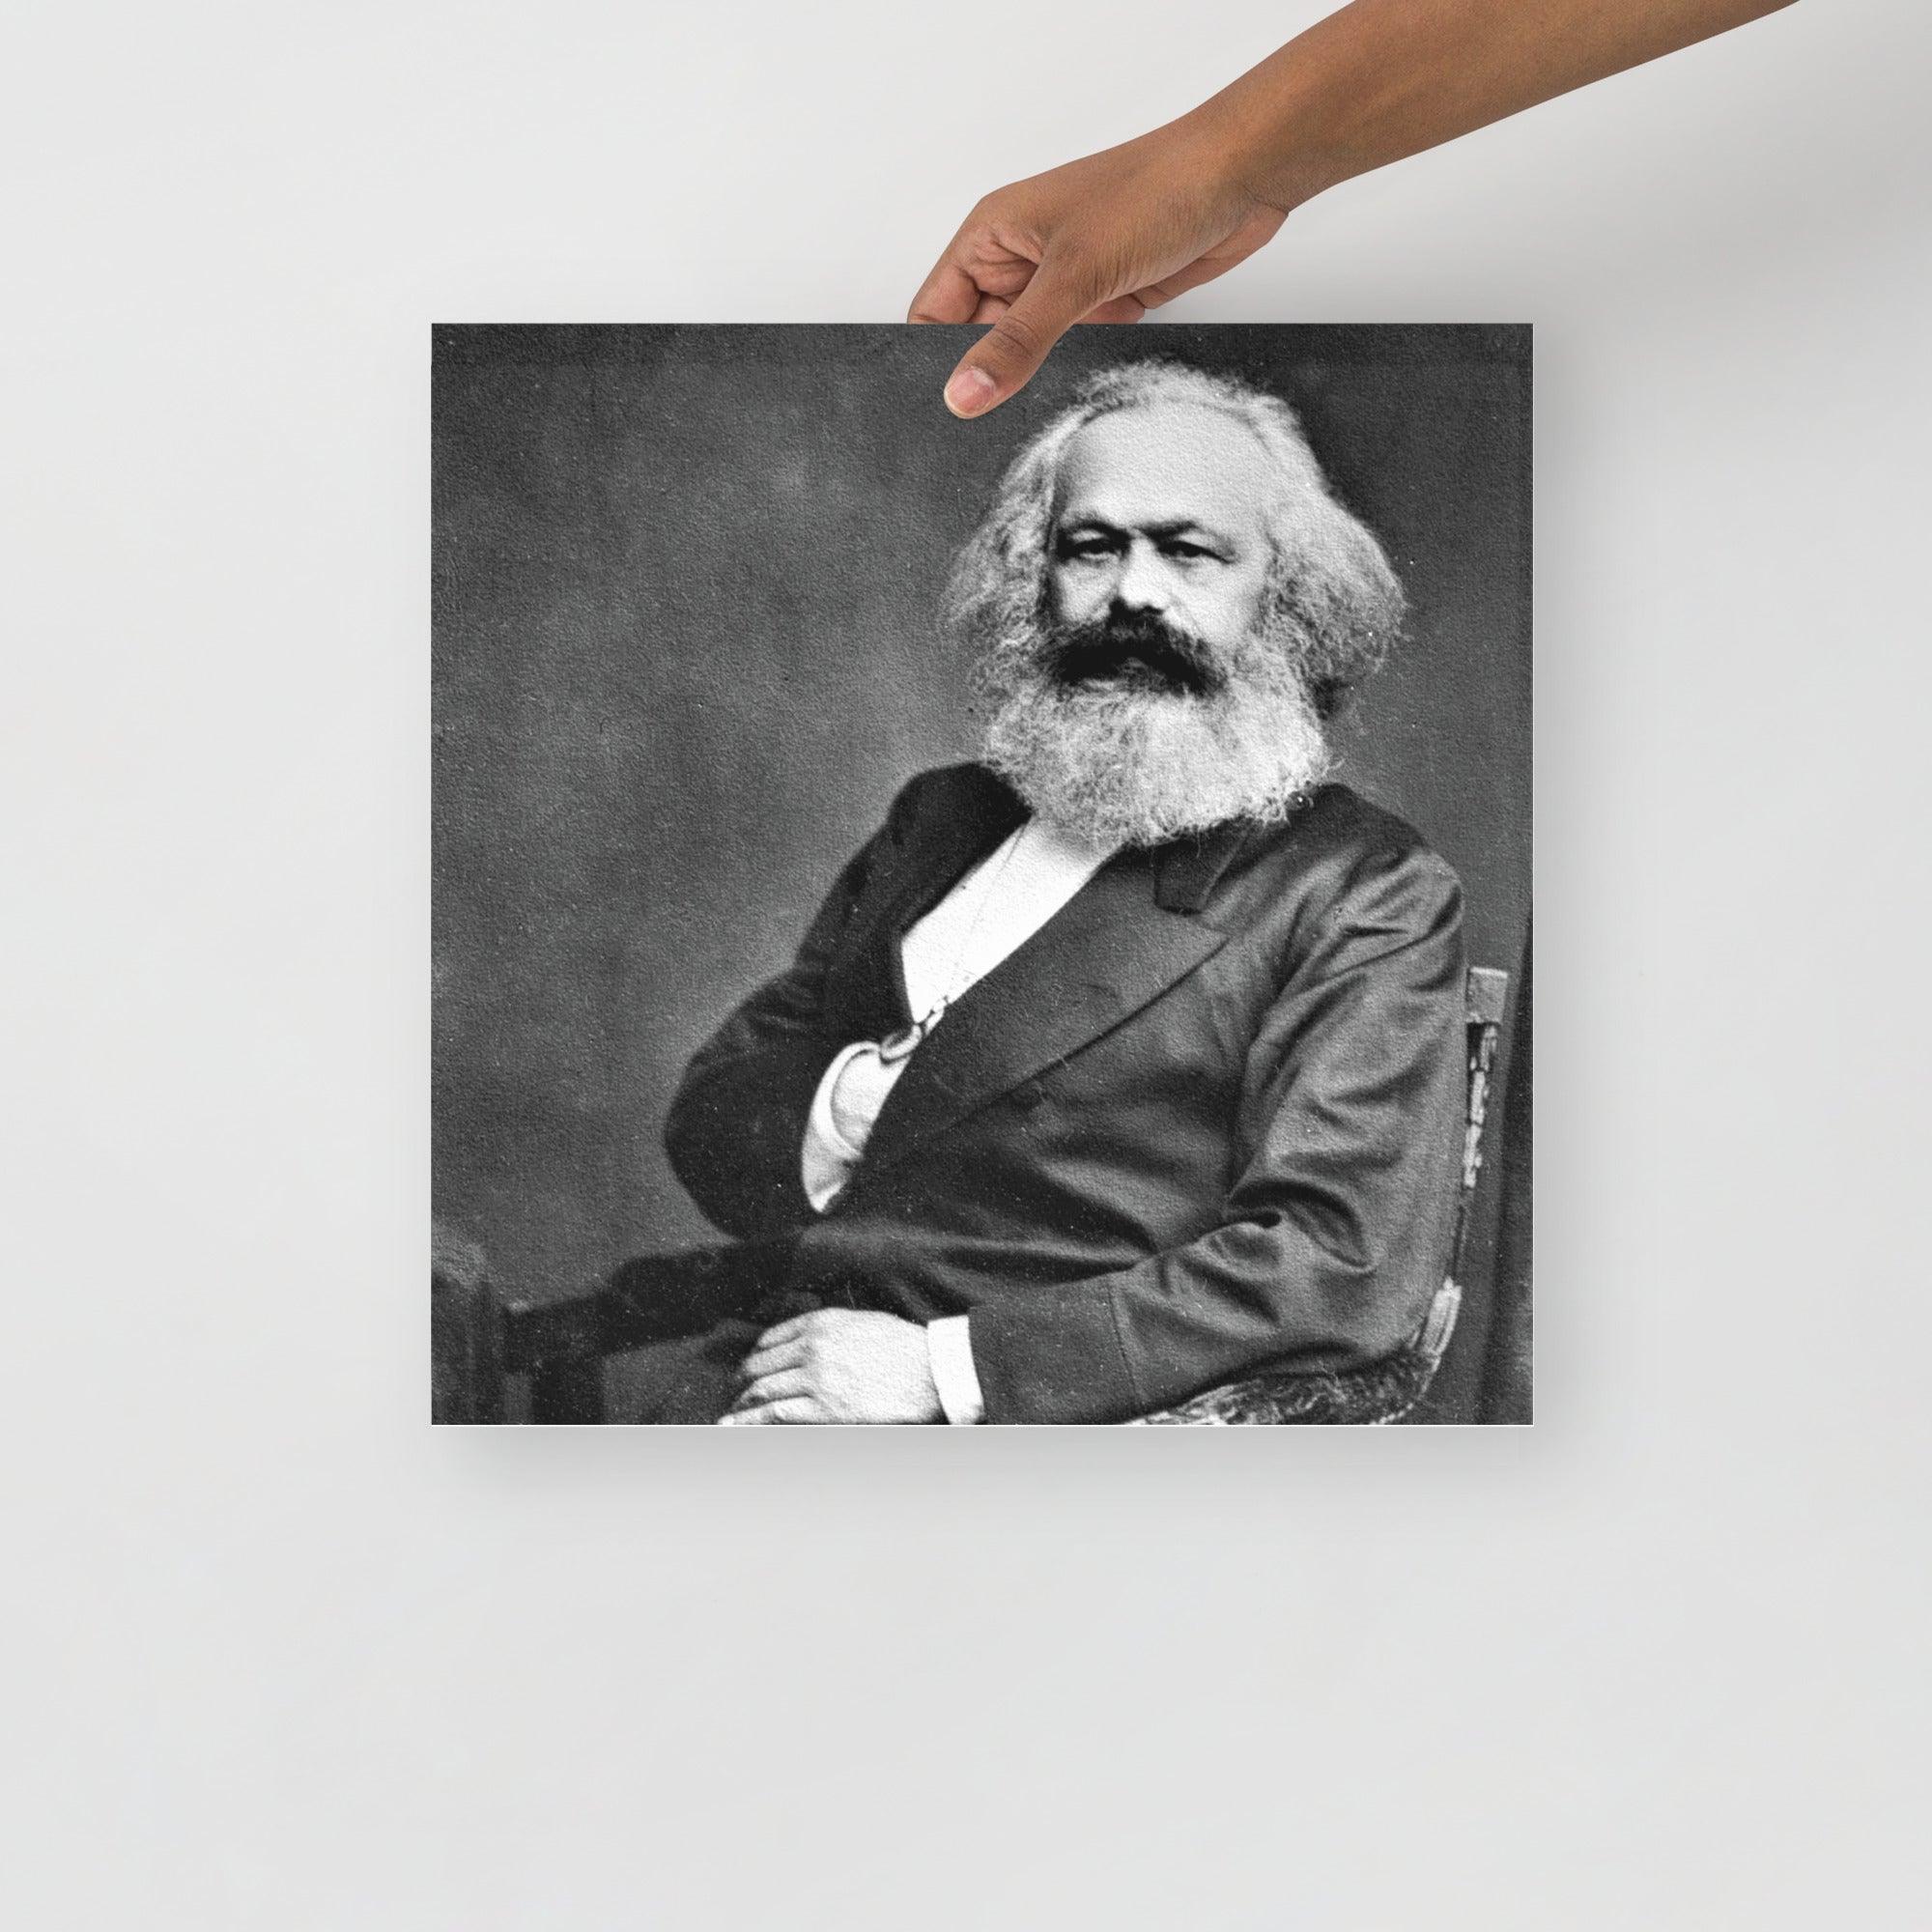 A Karl Marx poster on a plain backdrop in size 16x16”.